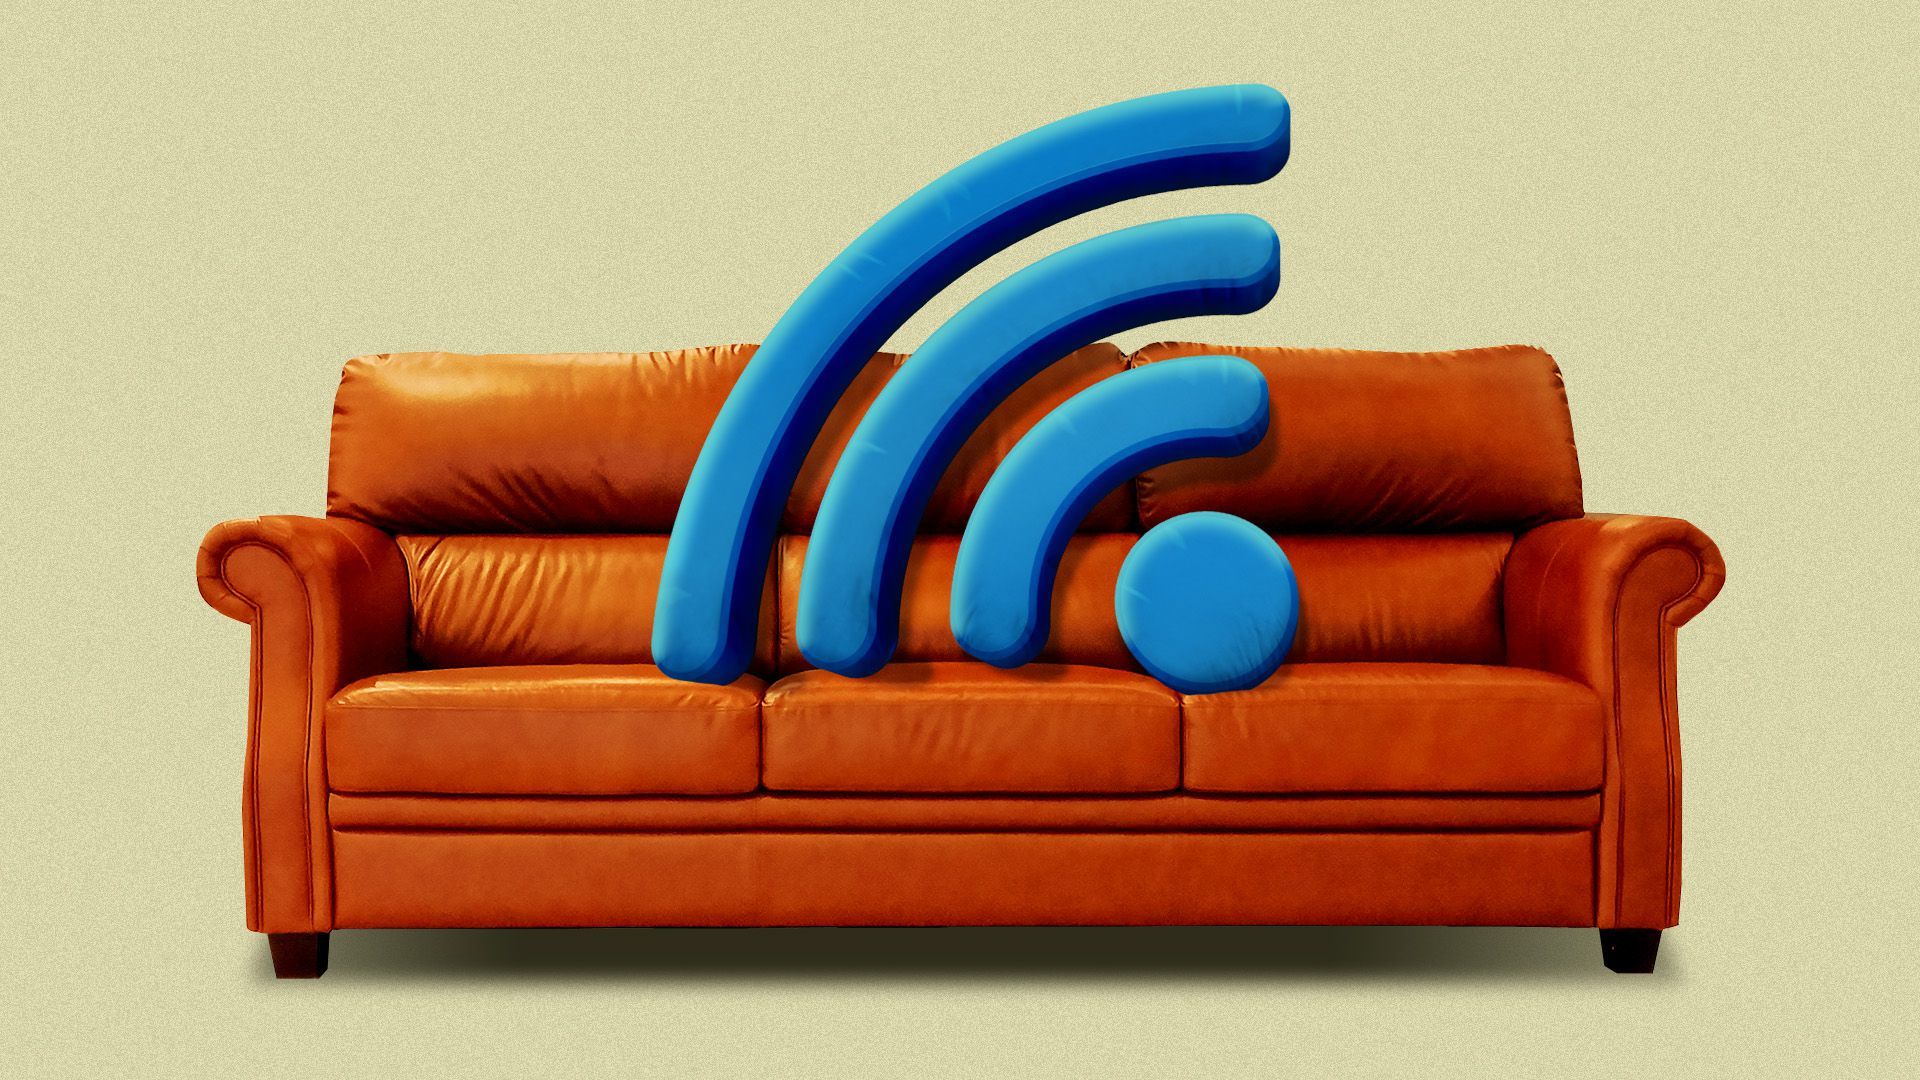 Illustration of a pillow on a couch in the shape of a wifi symbol